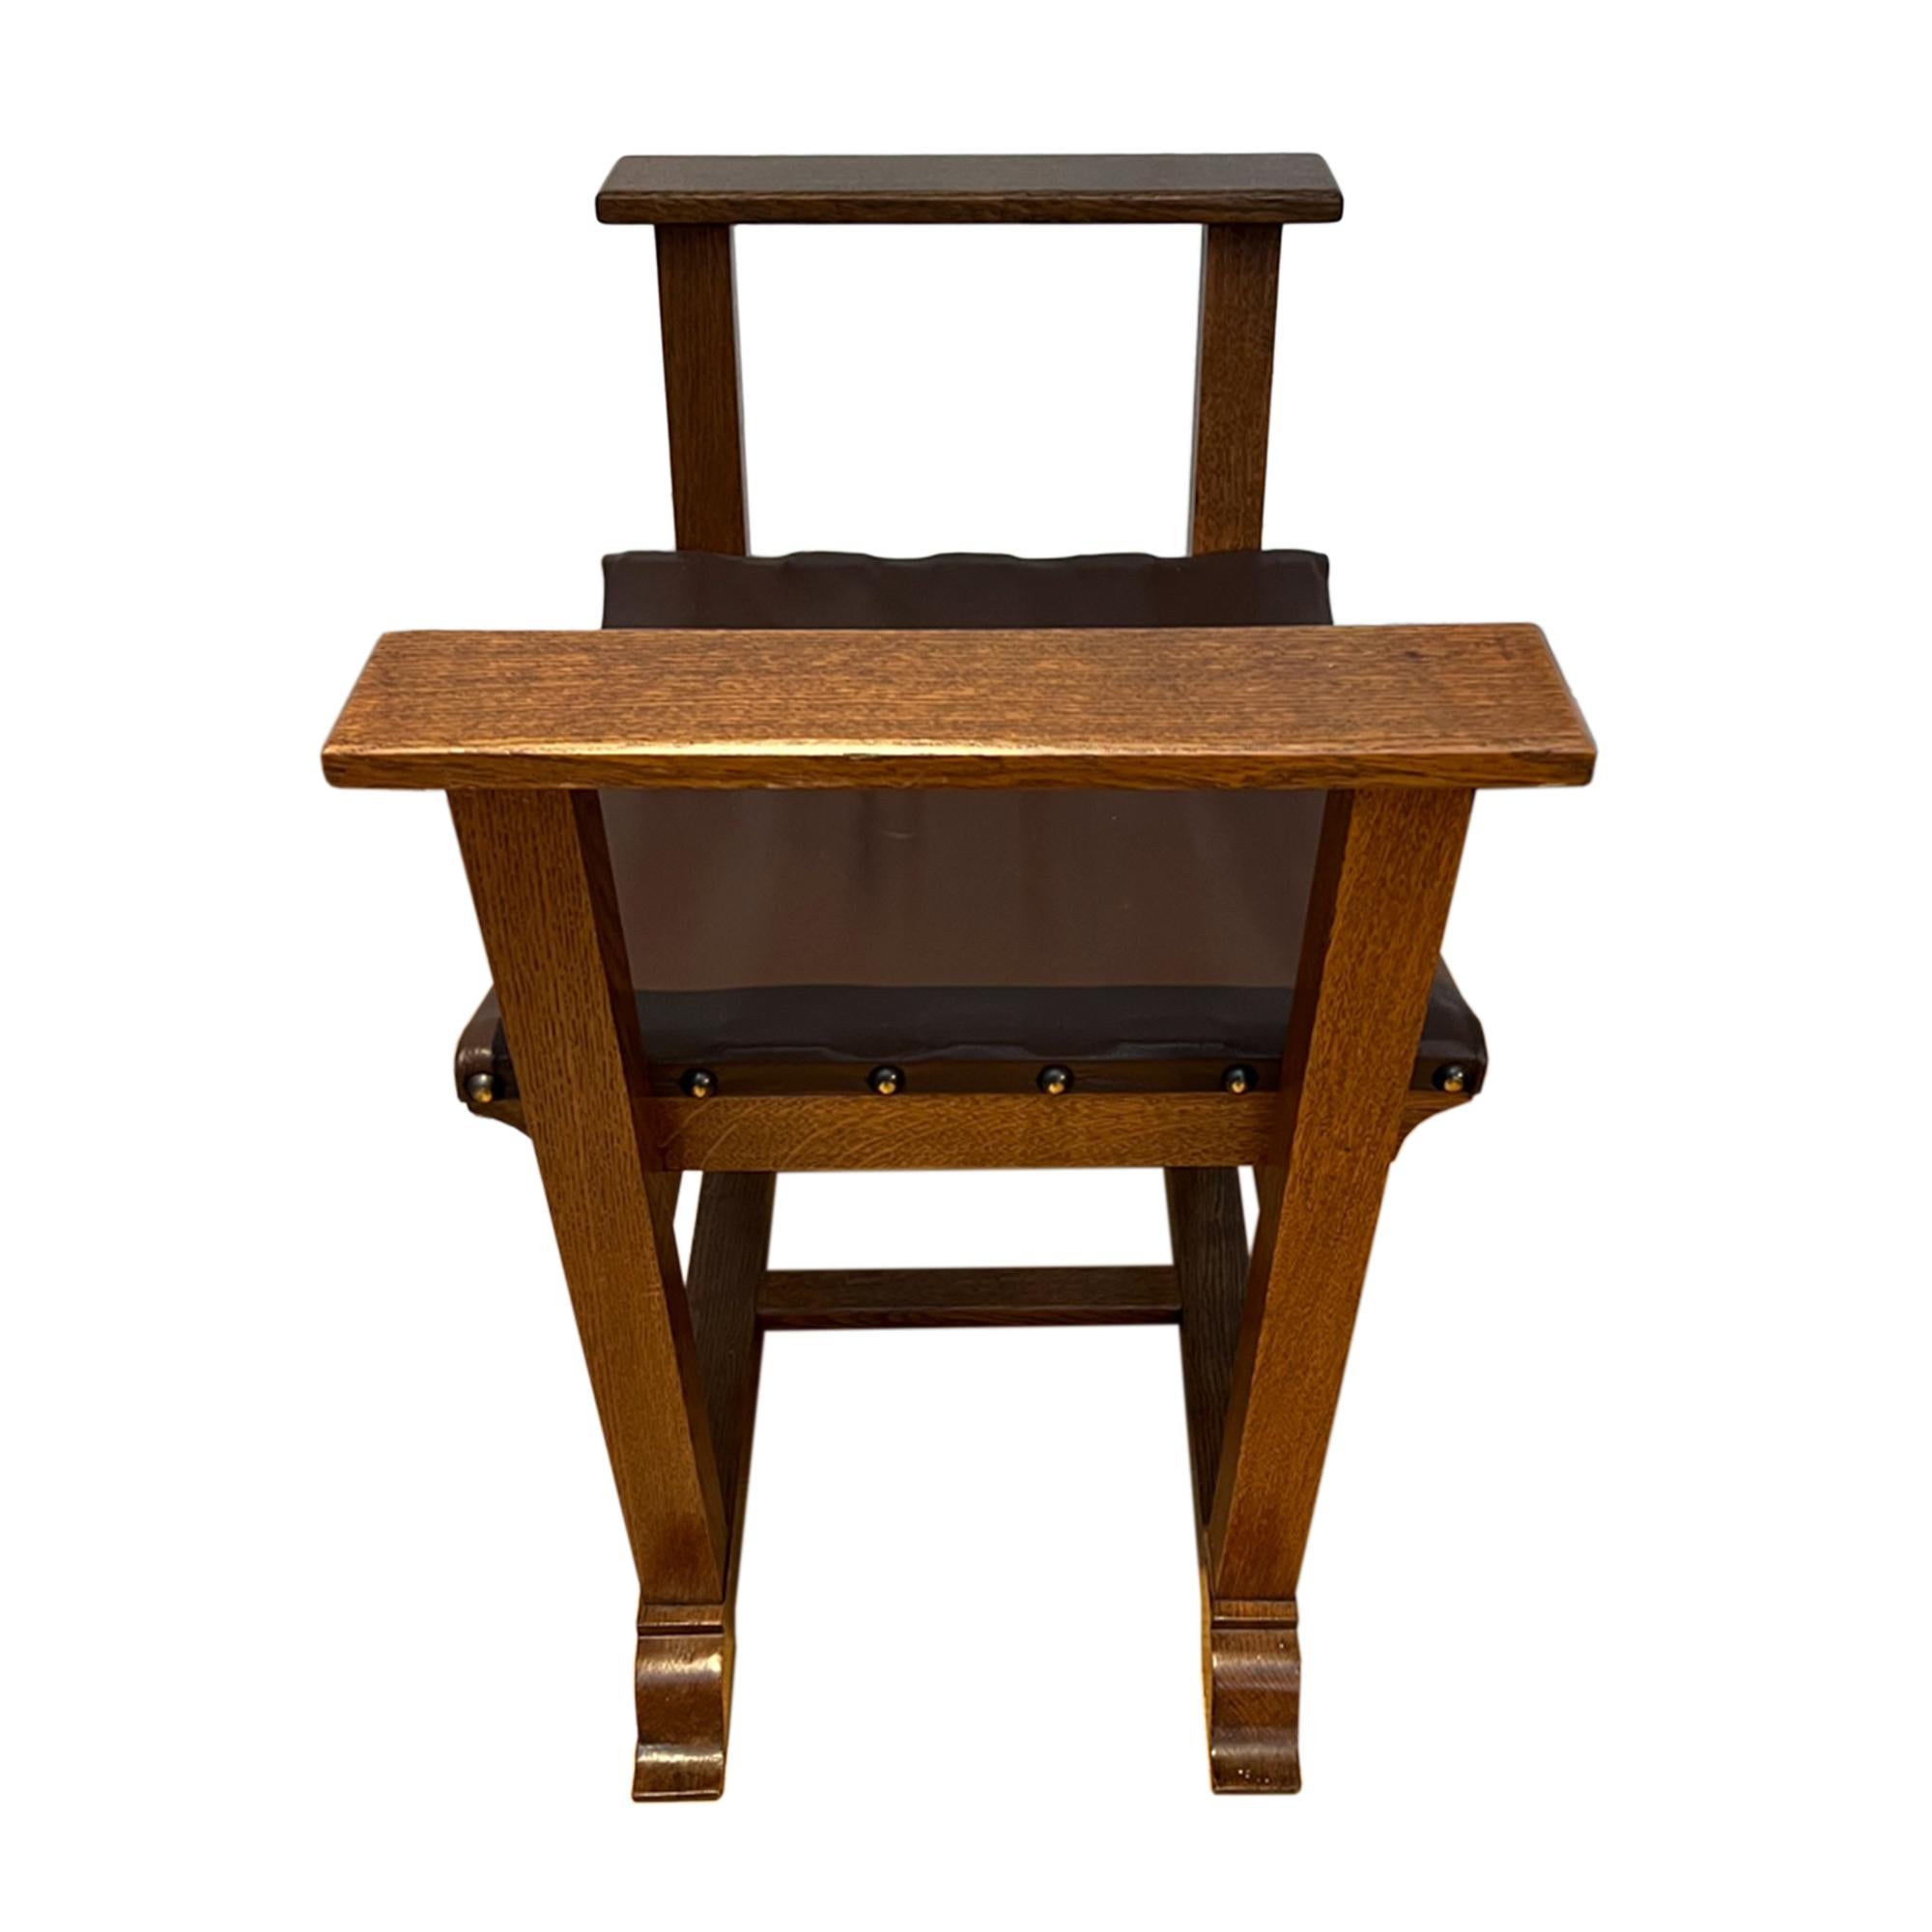 Hand-Crafted English Arts and Crafts Leather and Wood Stool For Sale